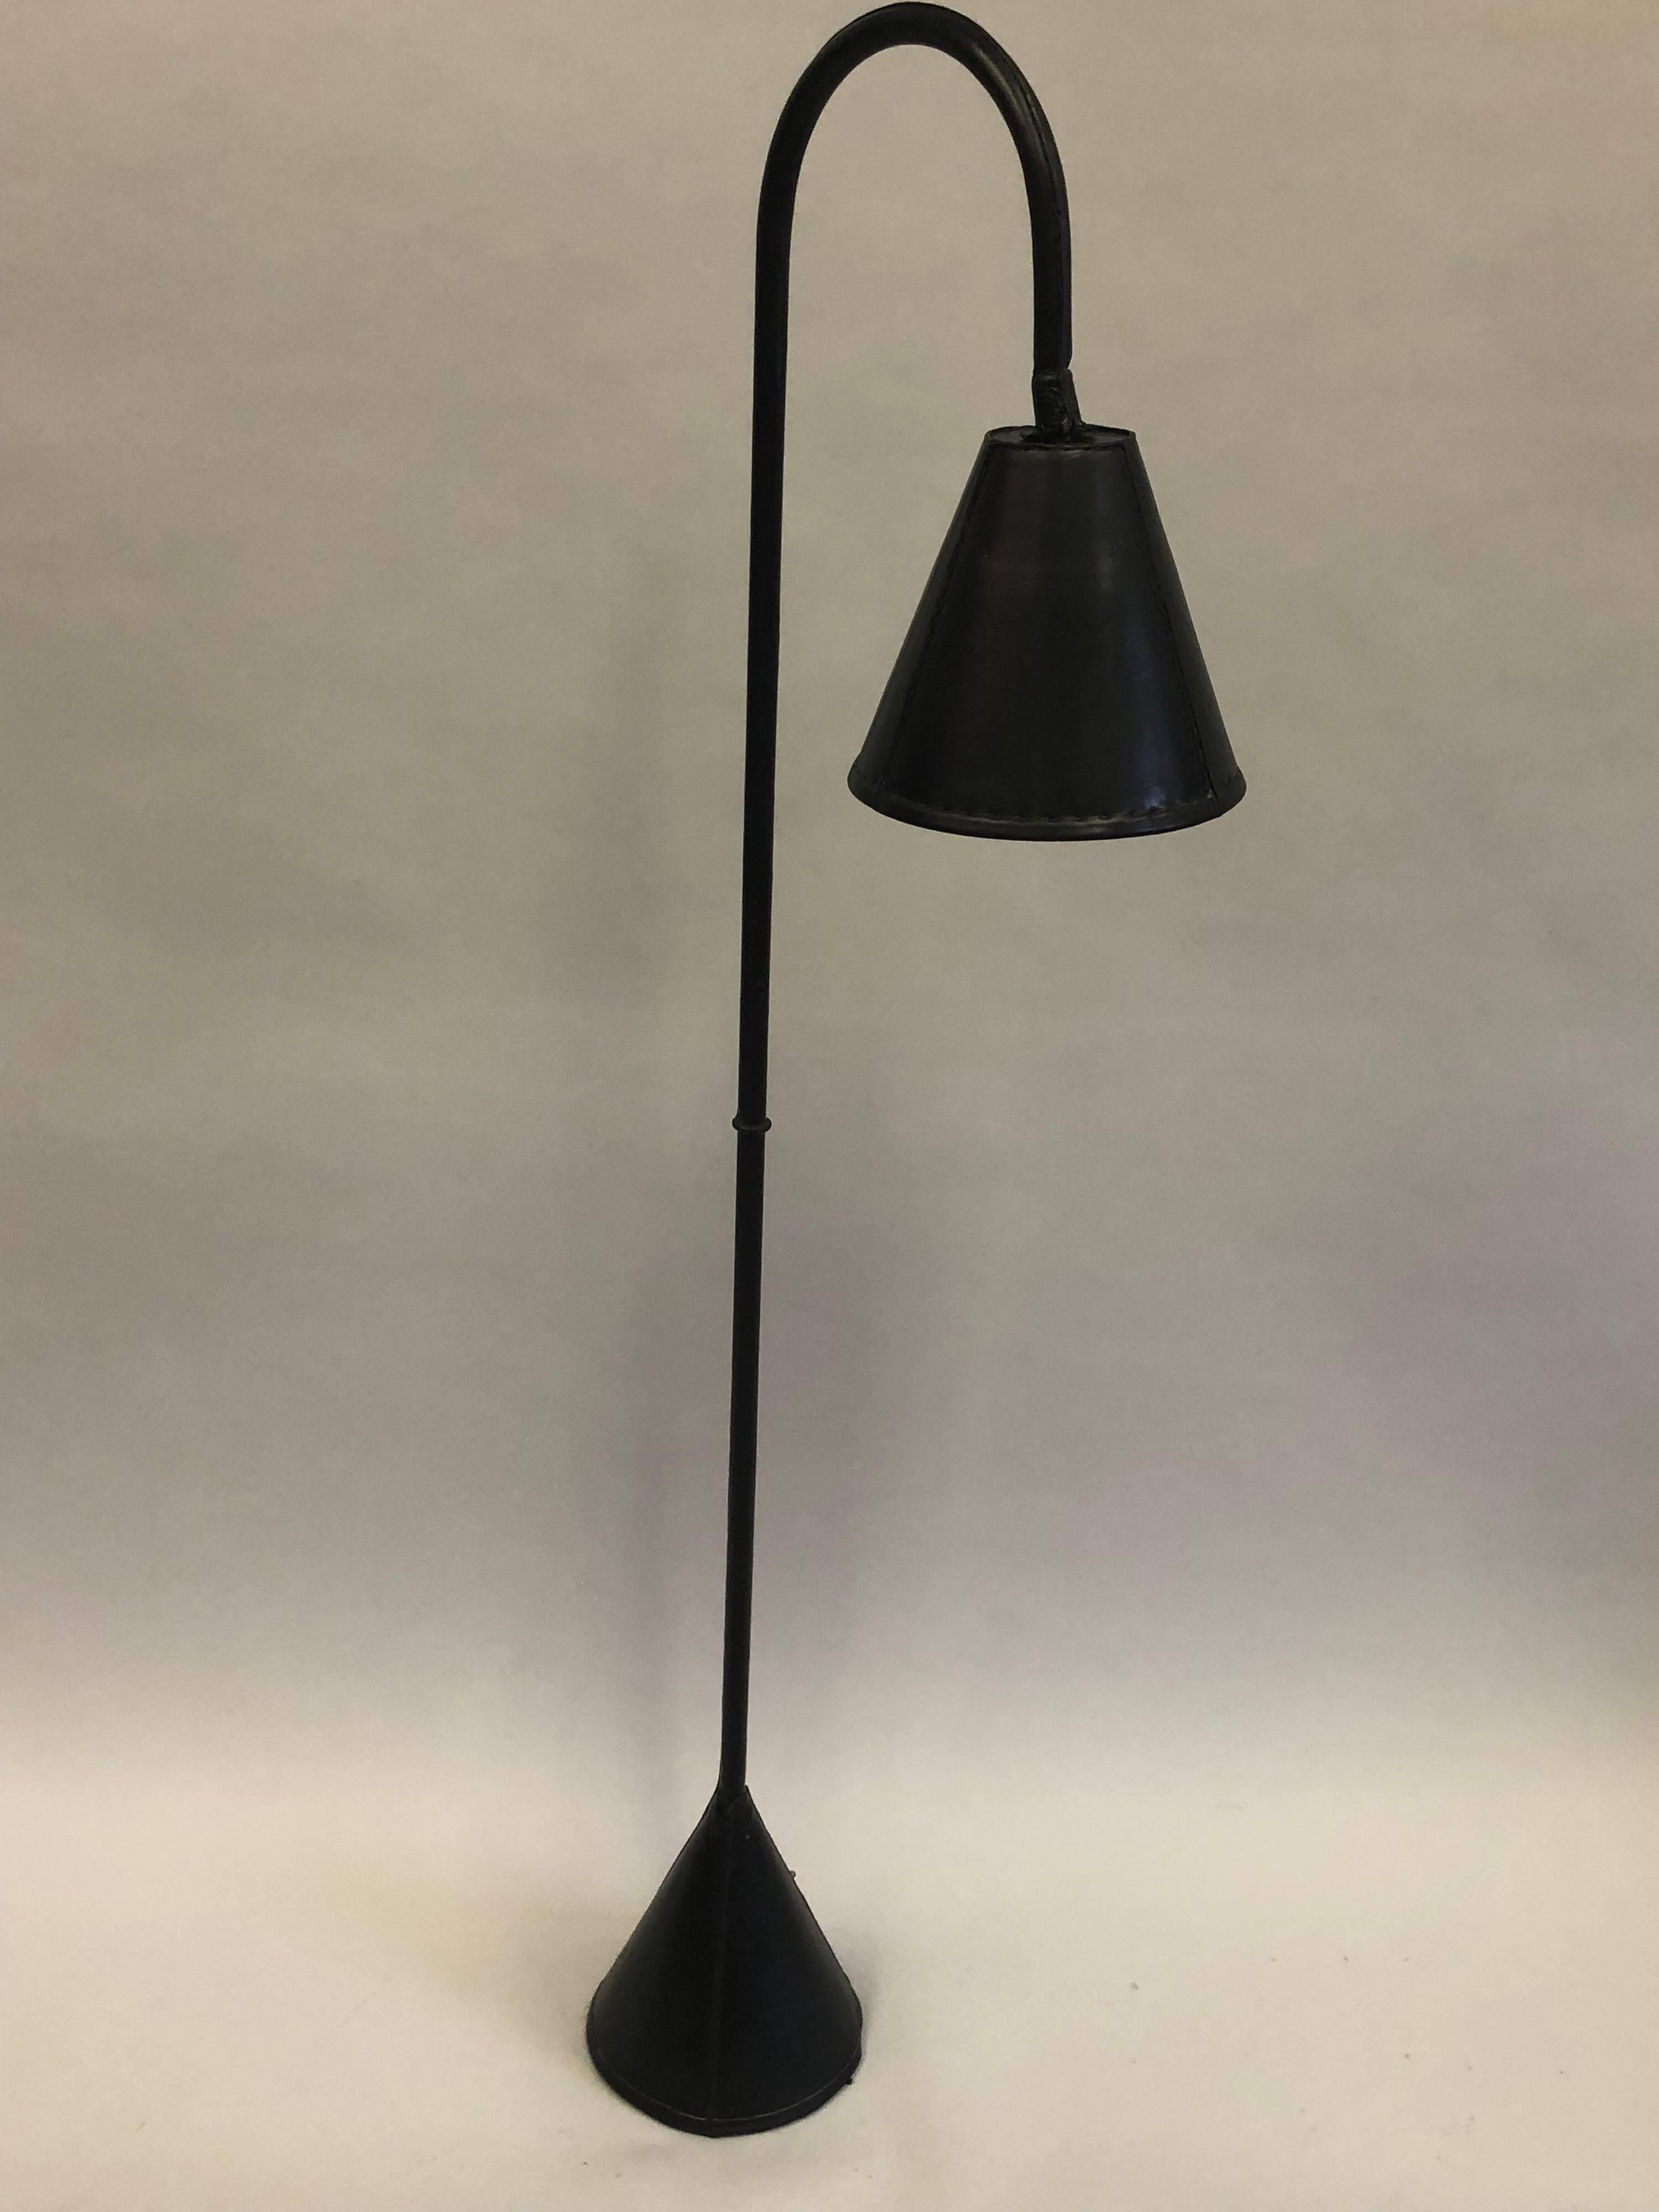 Mid-Century Modern Pair, French Midcentury Hand-stitched Black Leather Floor Lamps by Jacques Adnet